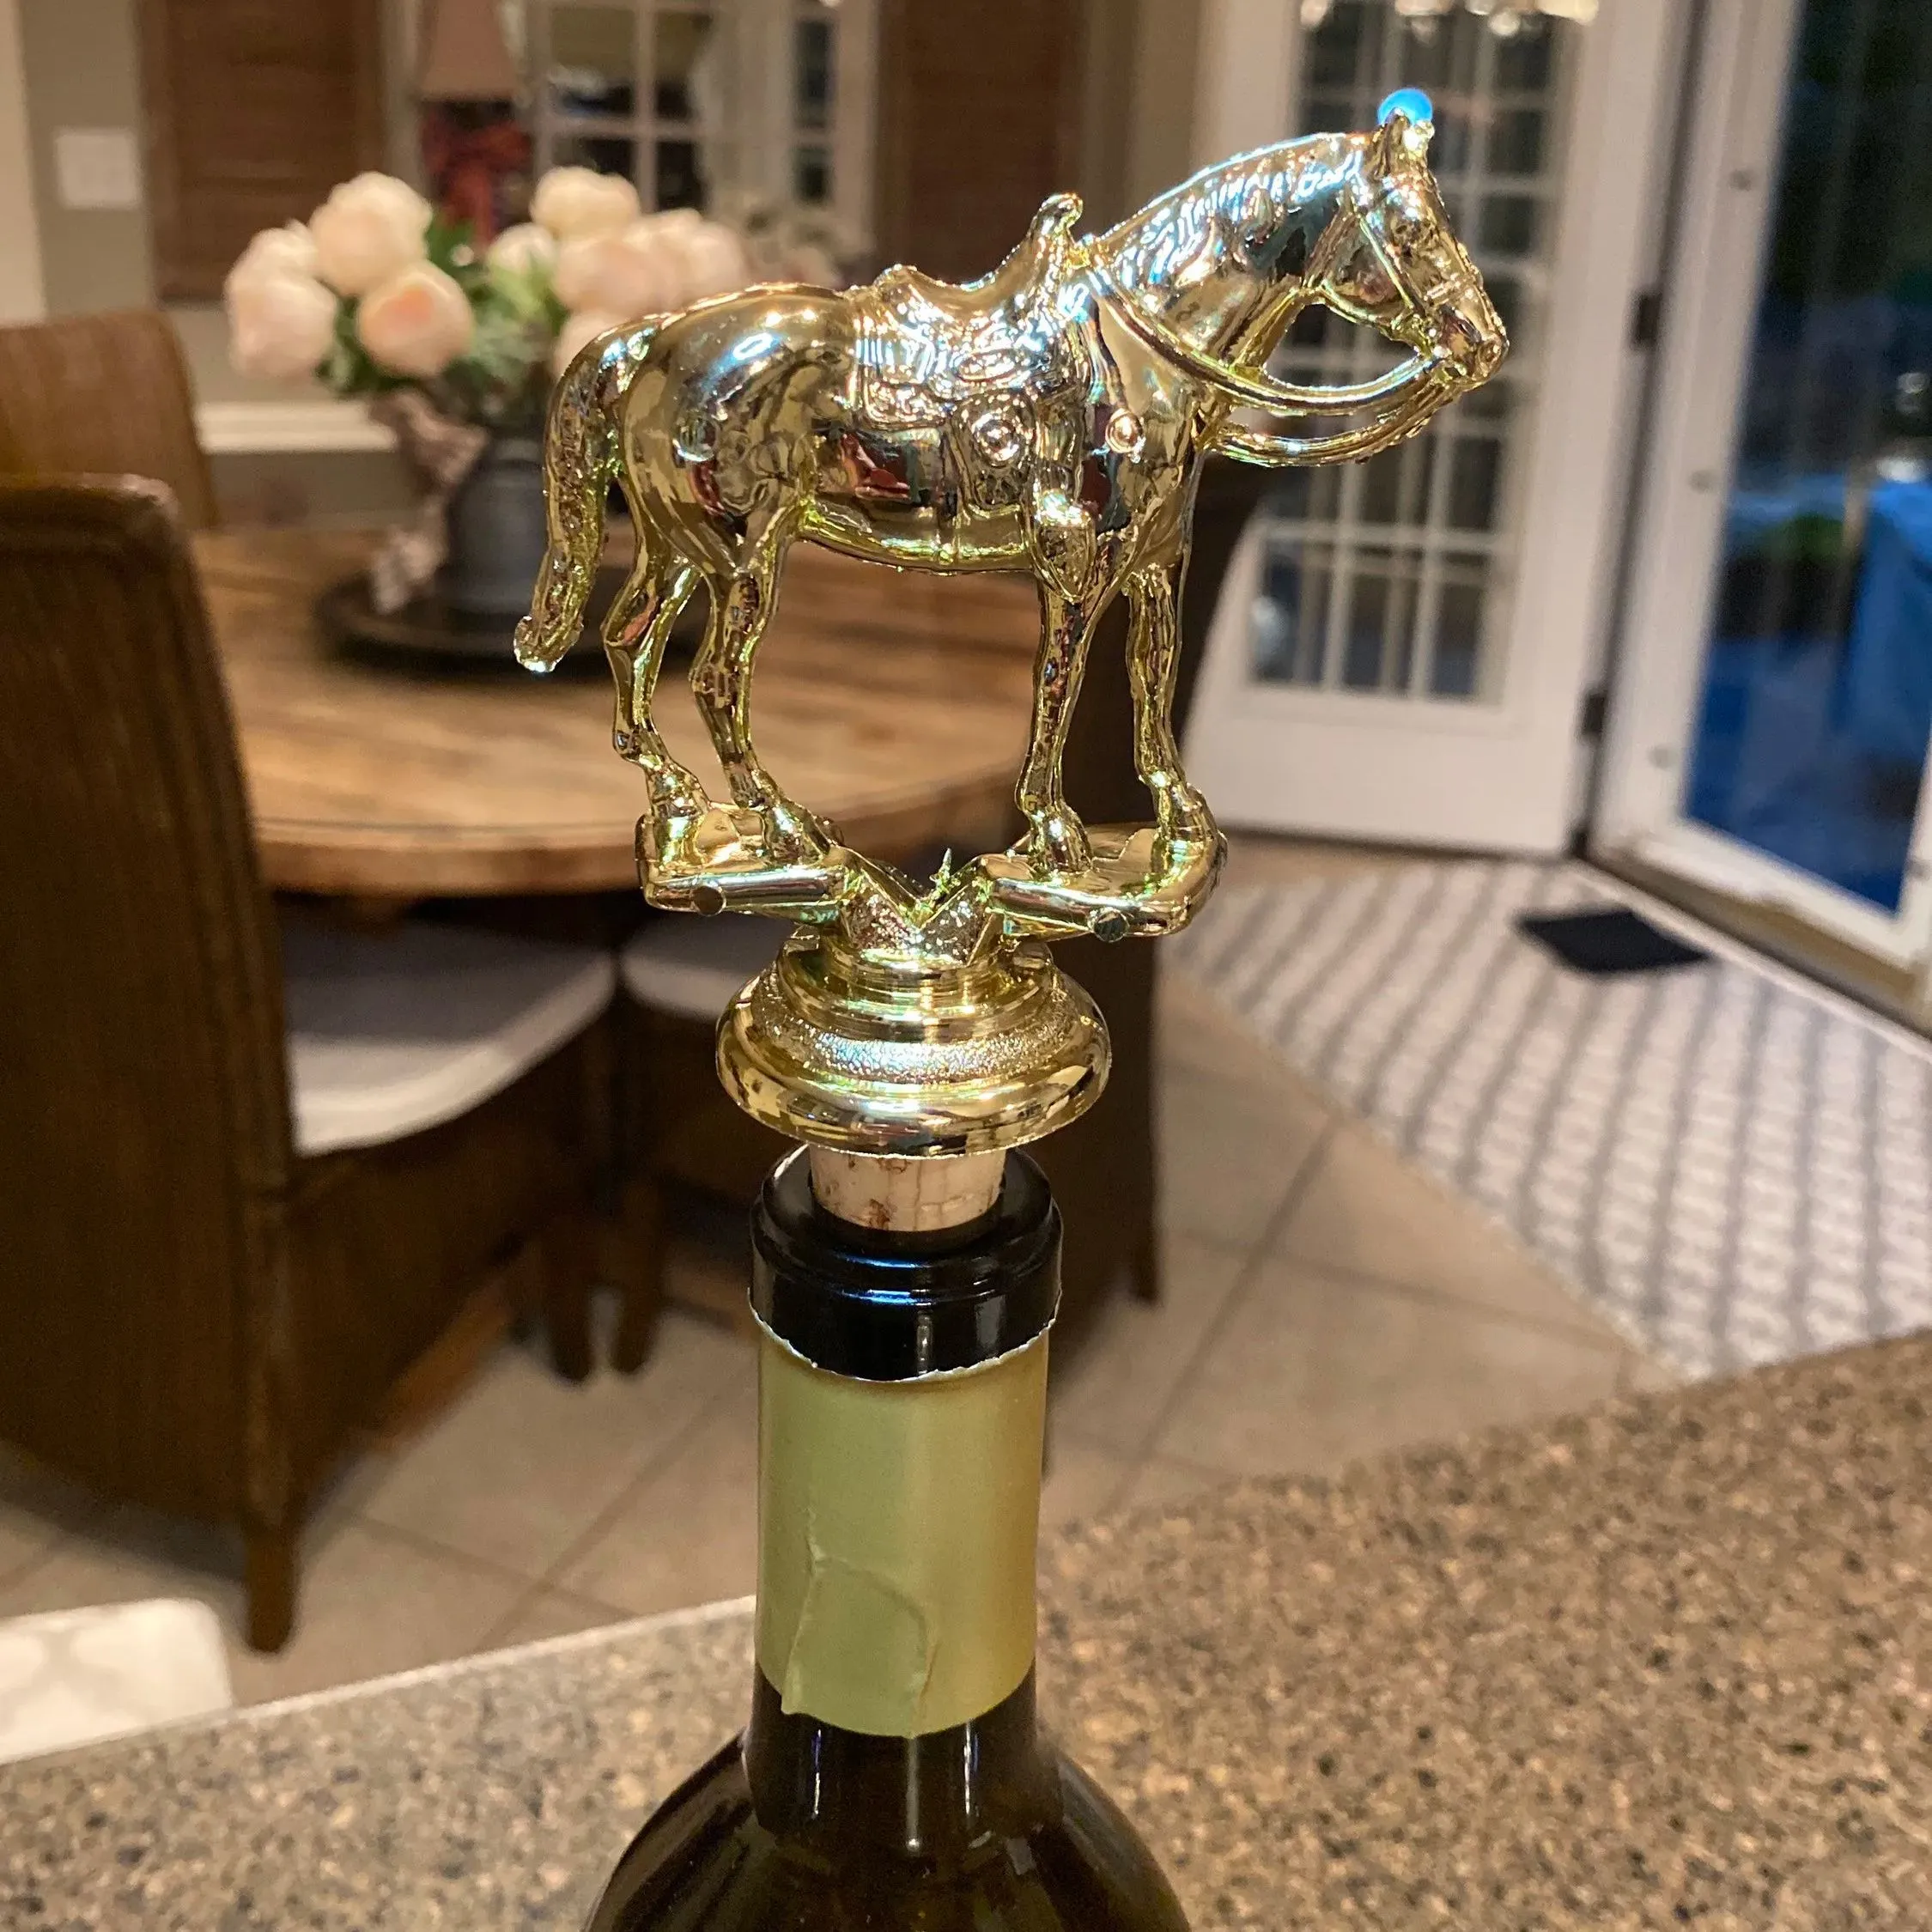 Equestrian Wine Topper: A Stylish Accessory for Horse Lovers